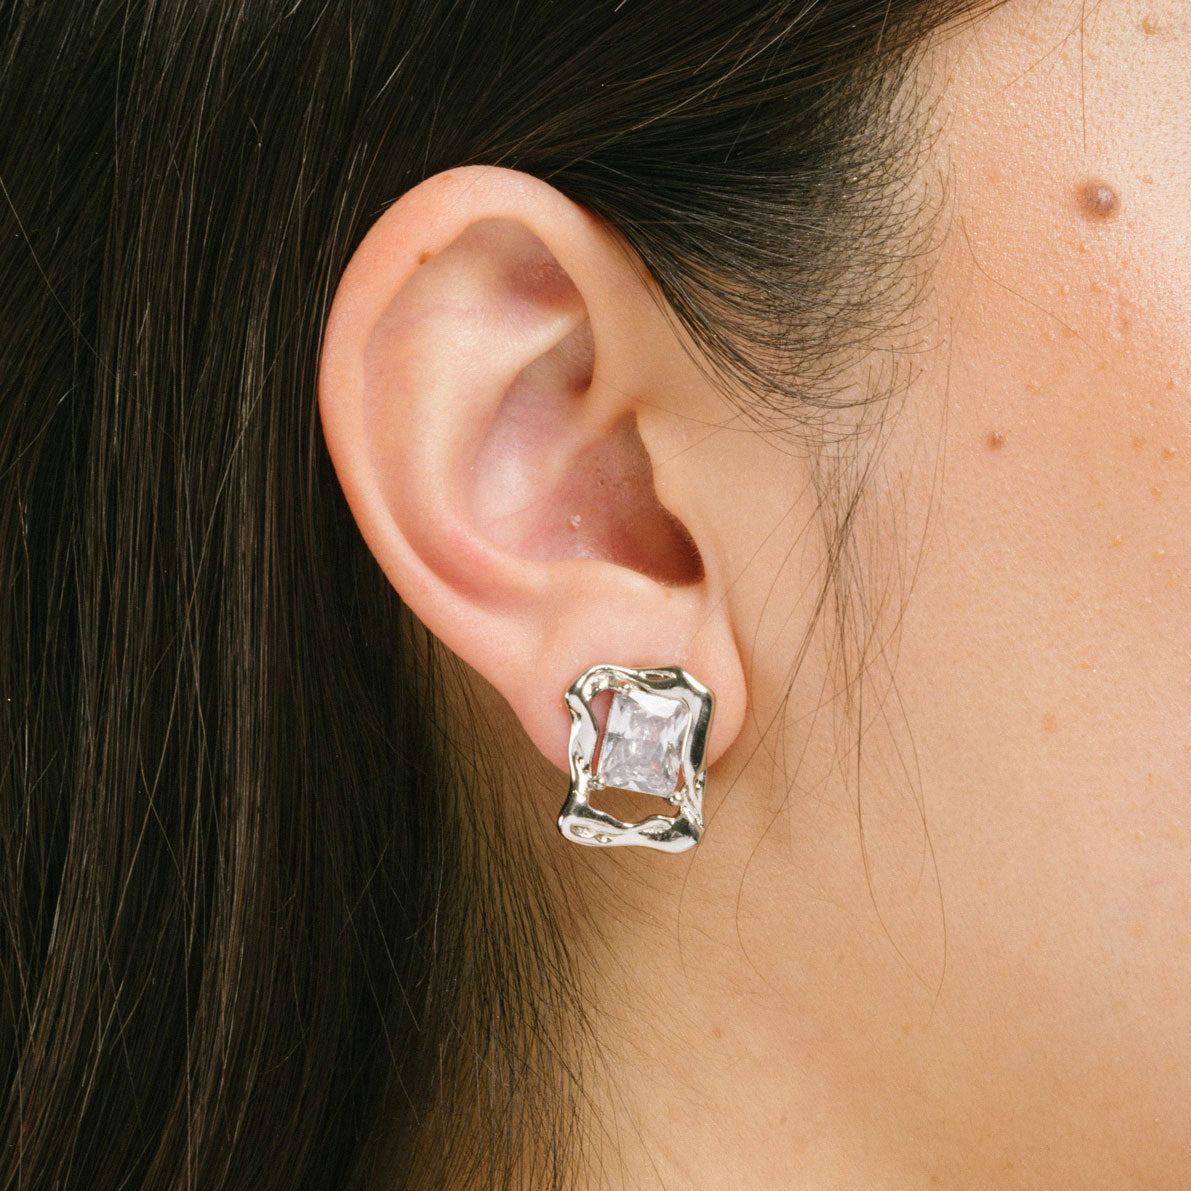 A model wearing the Valerie Clip On Earrings in Silver offer a secure hold for up to 12 hours of comfortable wear. Featuring a padded clip-on design, these earrings are ideal for all ear types, including those that are thick and large, sensitive, small and thin, or stretched and healing. Crafted with a silver tone copper alloy and cubic zirconia, each order includes one pair.